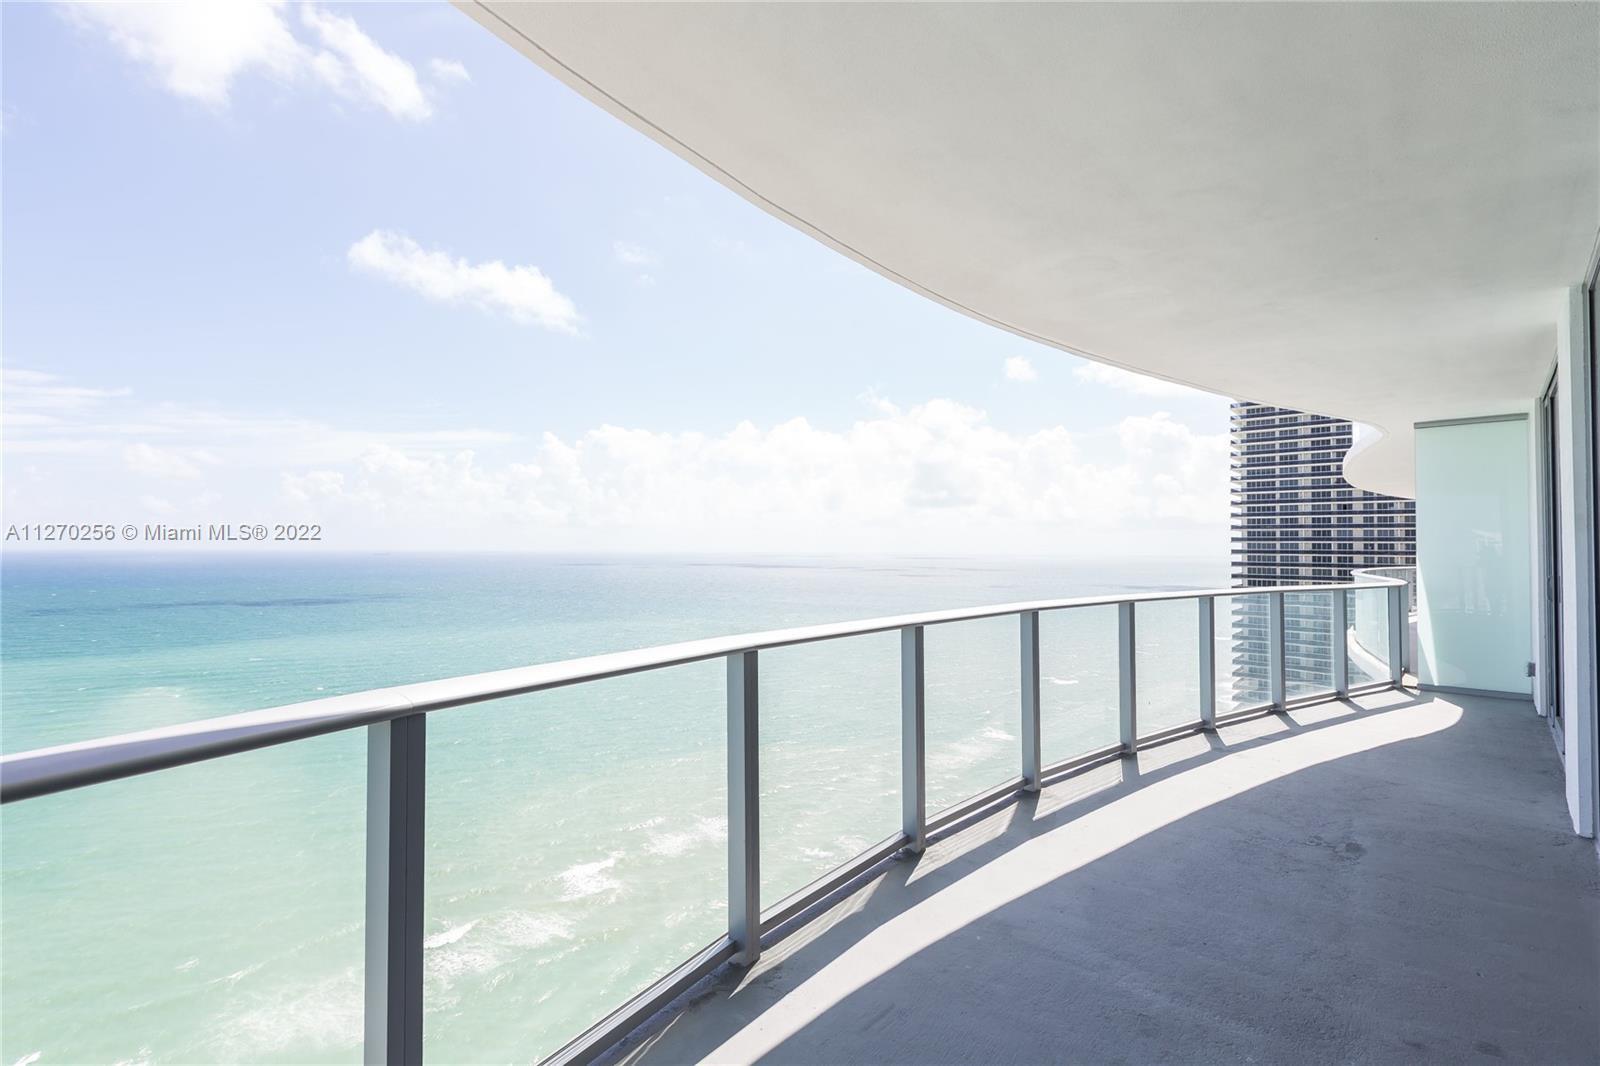 Photo of 4111 S Ocean Dr #3302 in Hollywood, FL